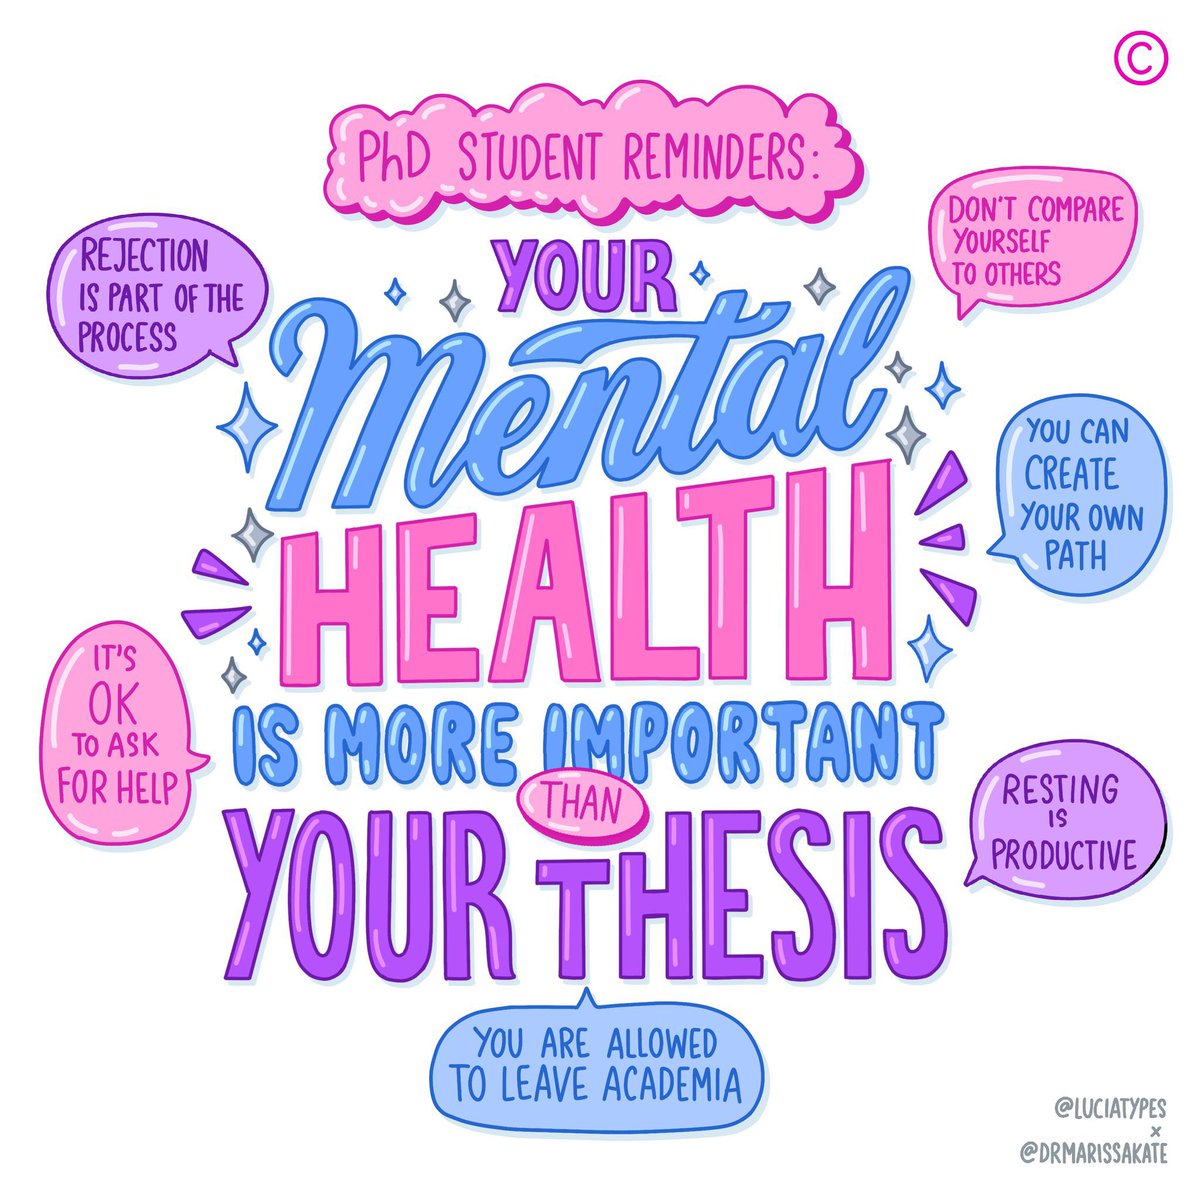 With lots of new followers here, it’s probably time to post this again. 💜 These are some of the daily reminders I wish I could have had when I was a PhD student. More #AcademicMentalHealth art with the wonderful @LuciaTypes coming hopefully later this year. ☺️